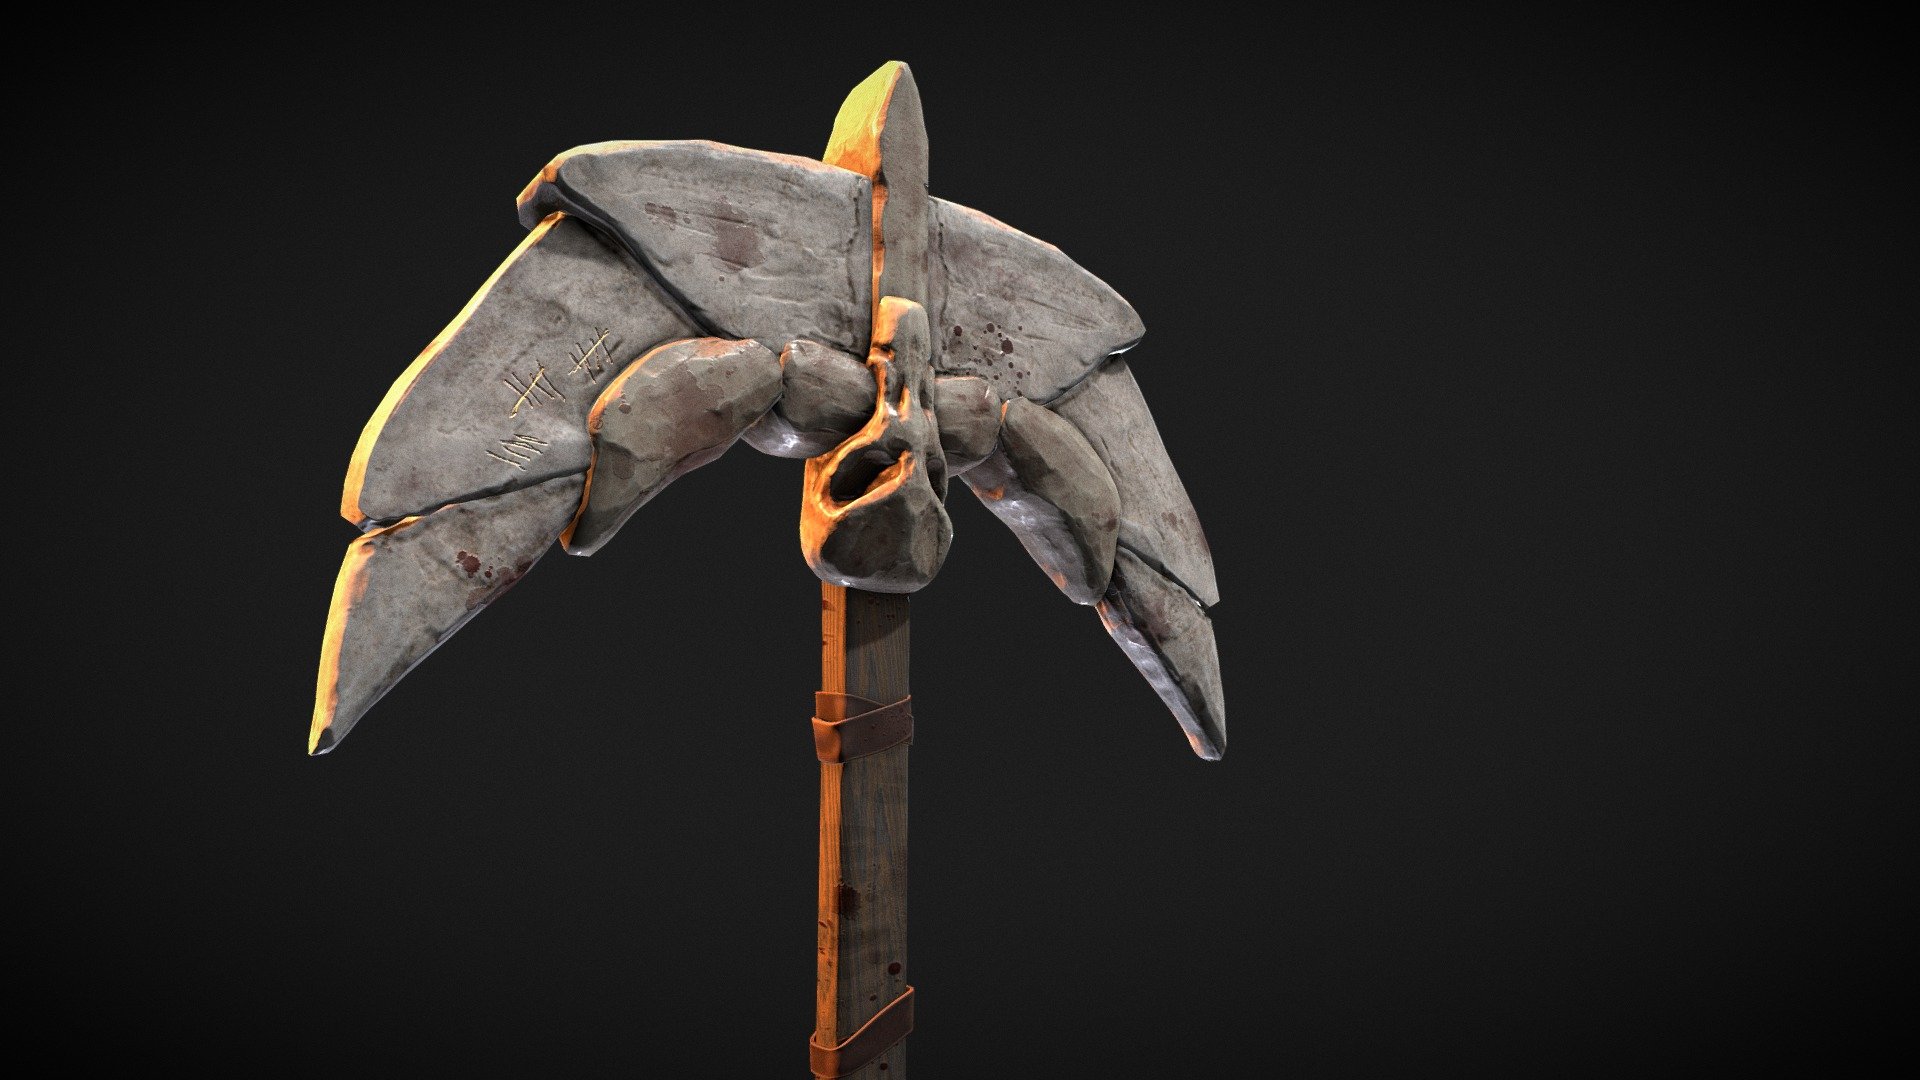 This is the Mythosaur Axe from the Star Wars Universe, i couldn't find a ton of references for it so I kind of took it my own direction, loosely based off the Star Wars pedia picture of the axe though 3d model